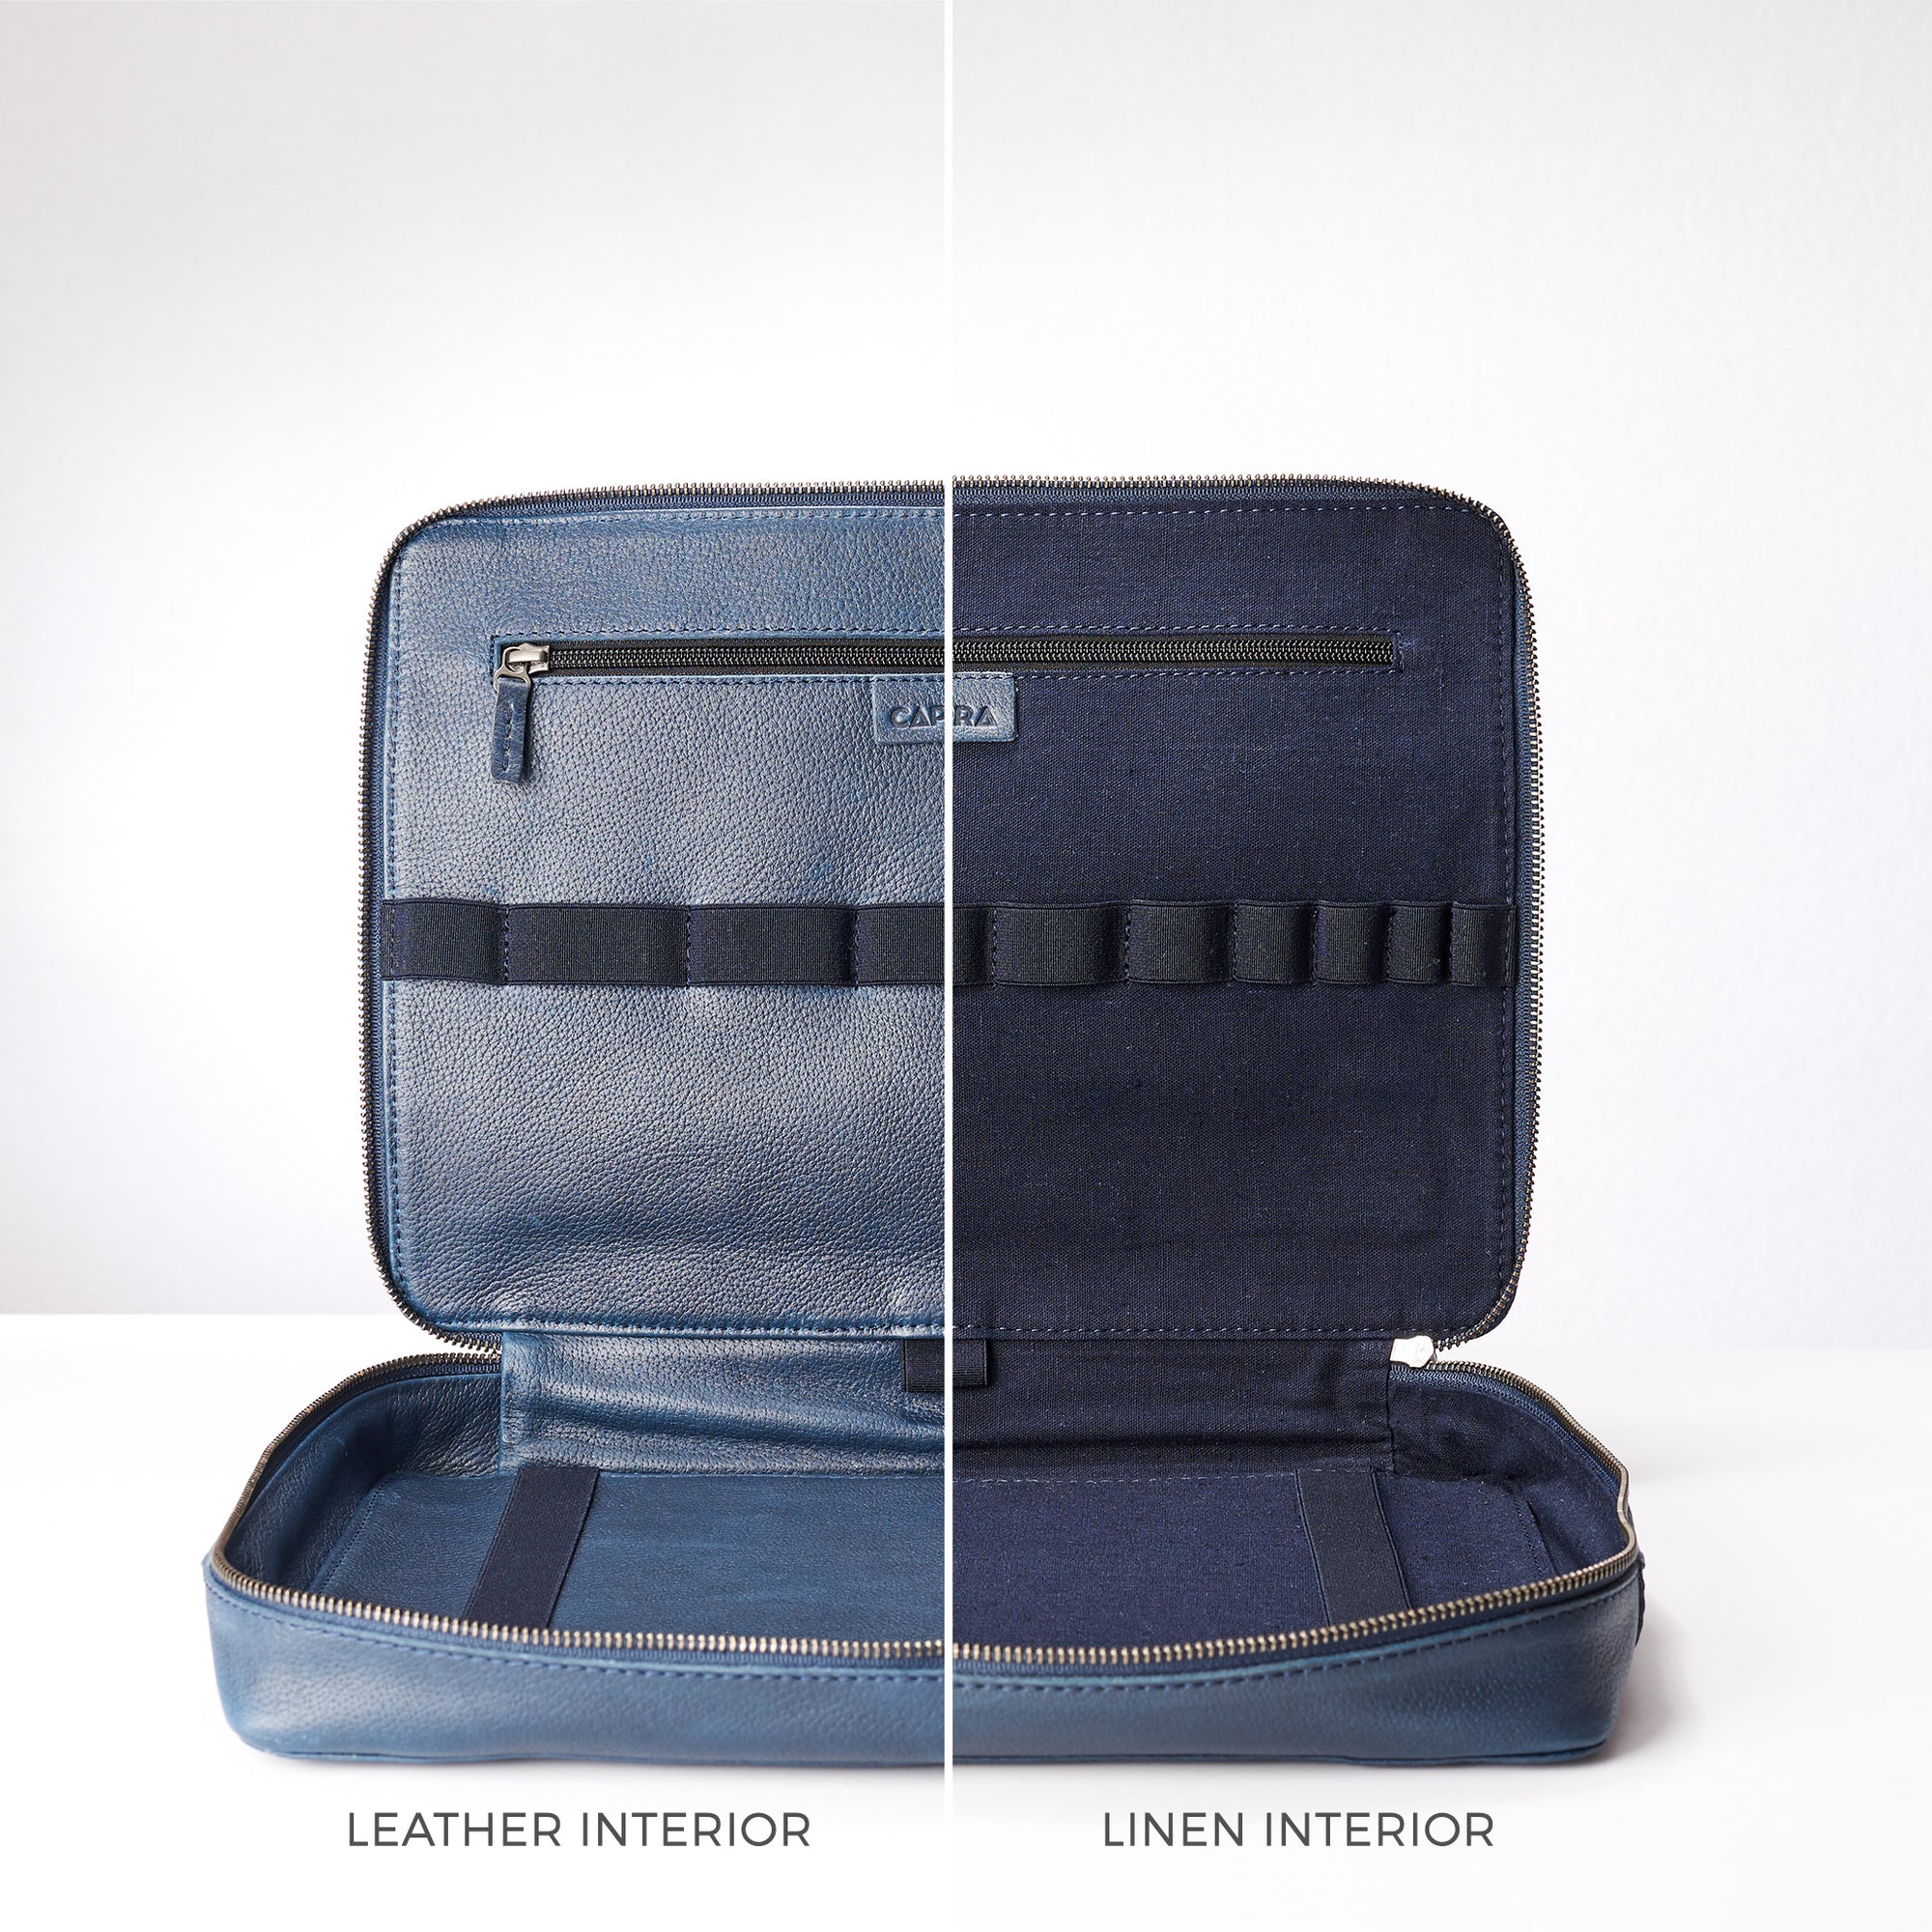 Leather and linen interior. Navy blue electronic organizer by Capra Leather